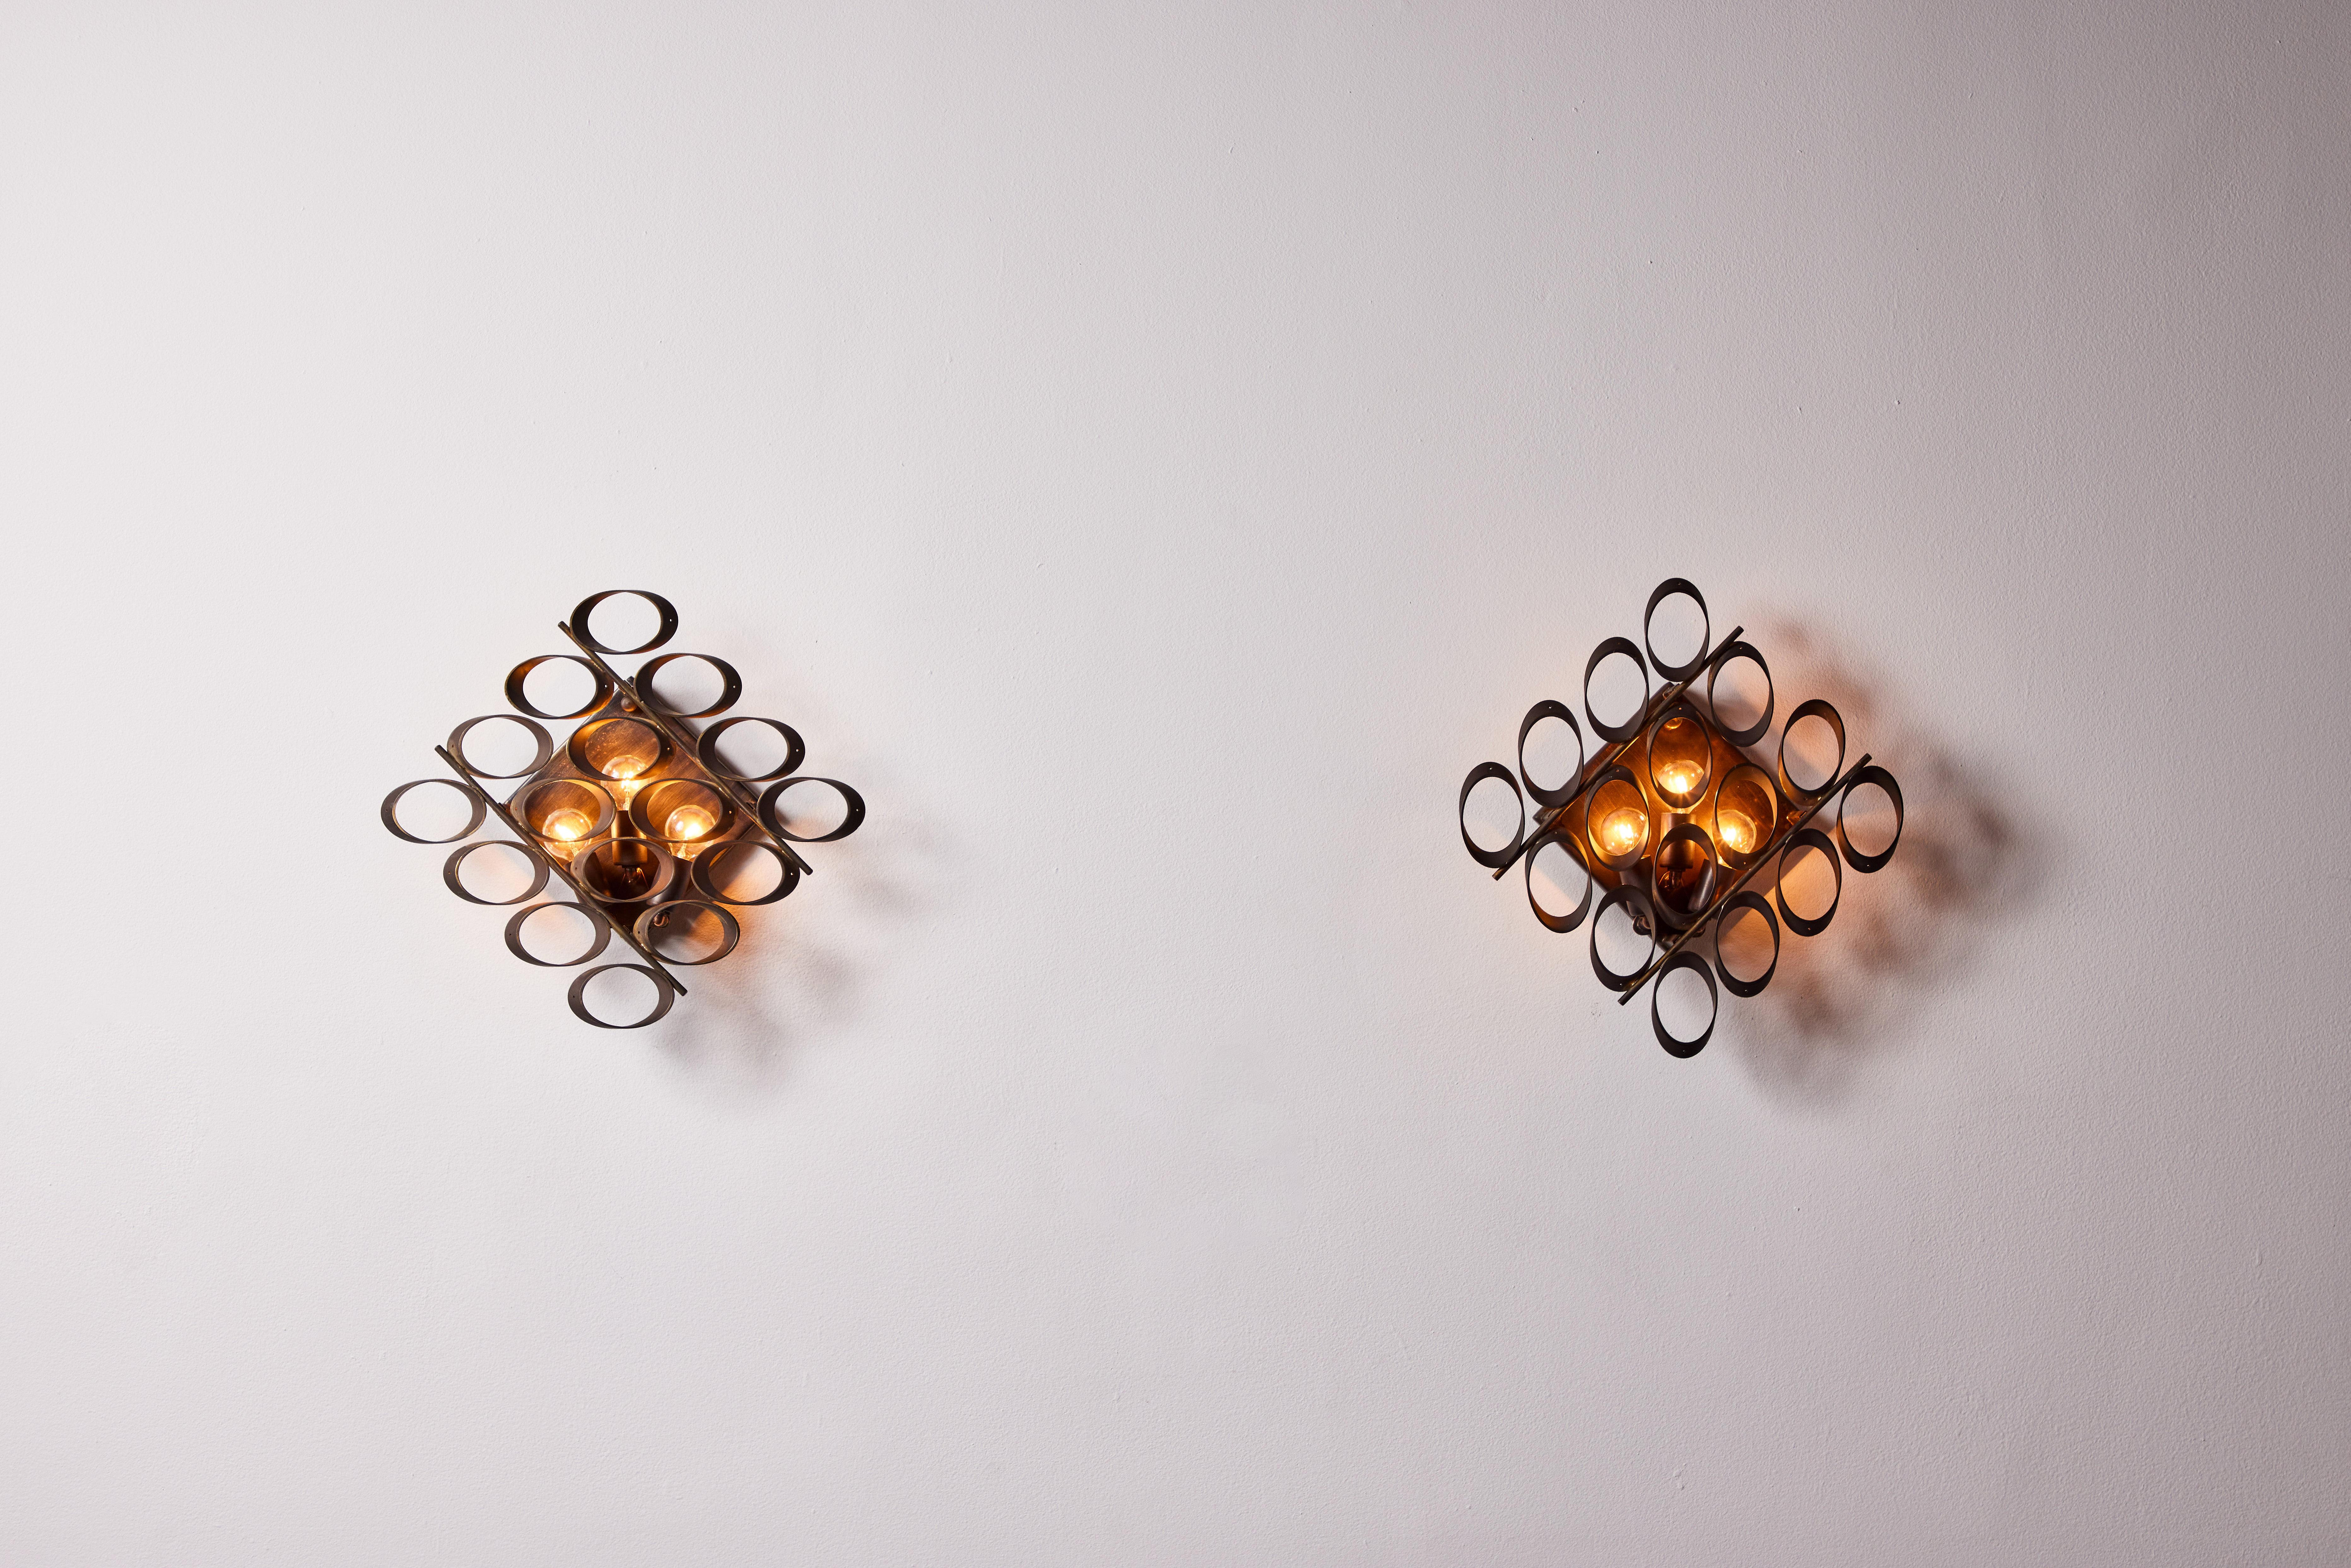 Pair of sconces by Sciolari. Designed and manufactured in Italy, circa 1950s. Brass, custom brass backplates. Rewired for U.S. standards. We recommend 3 E12 20w candelabra per sconce. Bulbs provided as a one time courtesy.